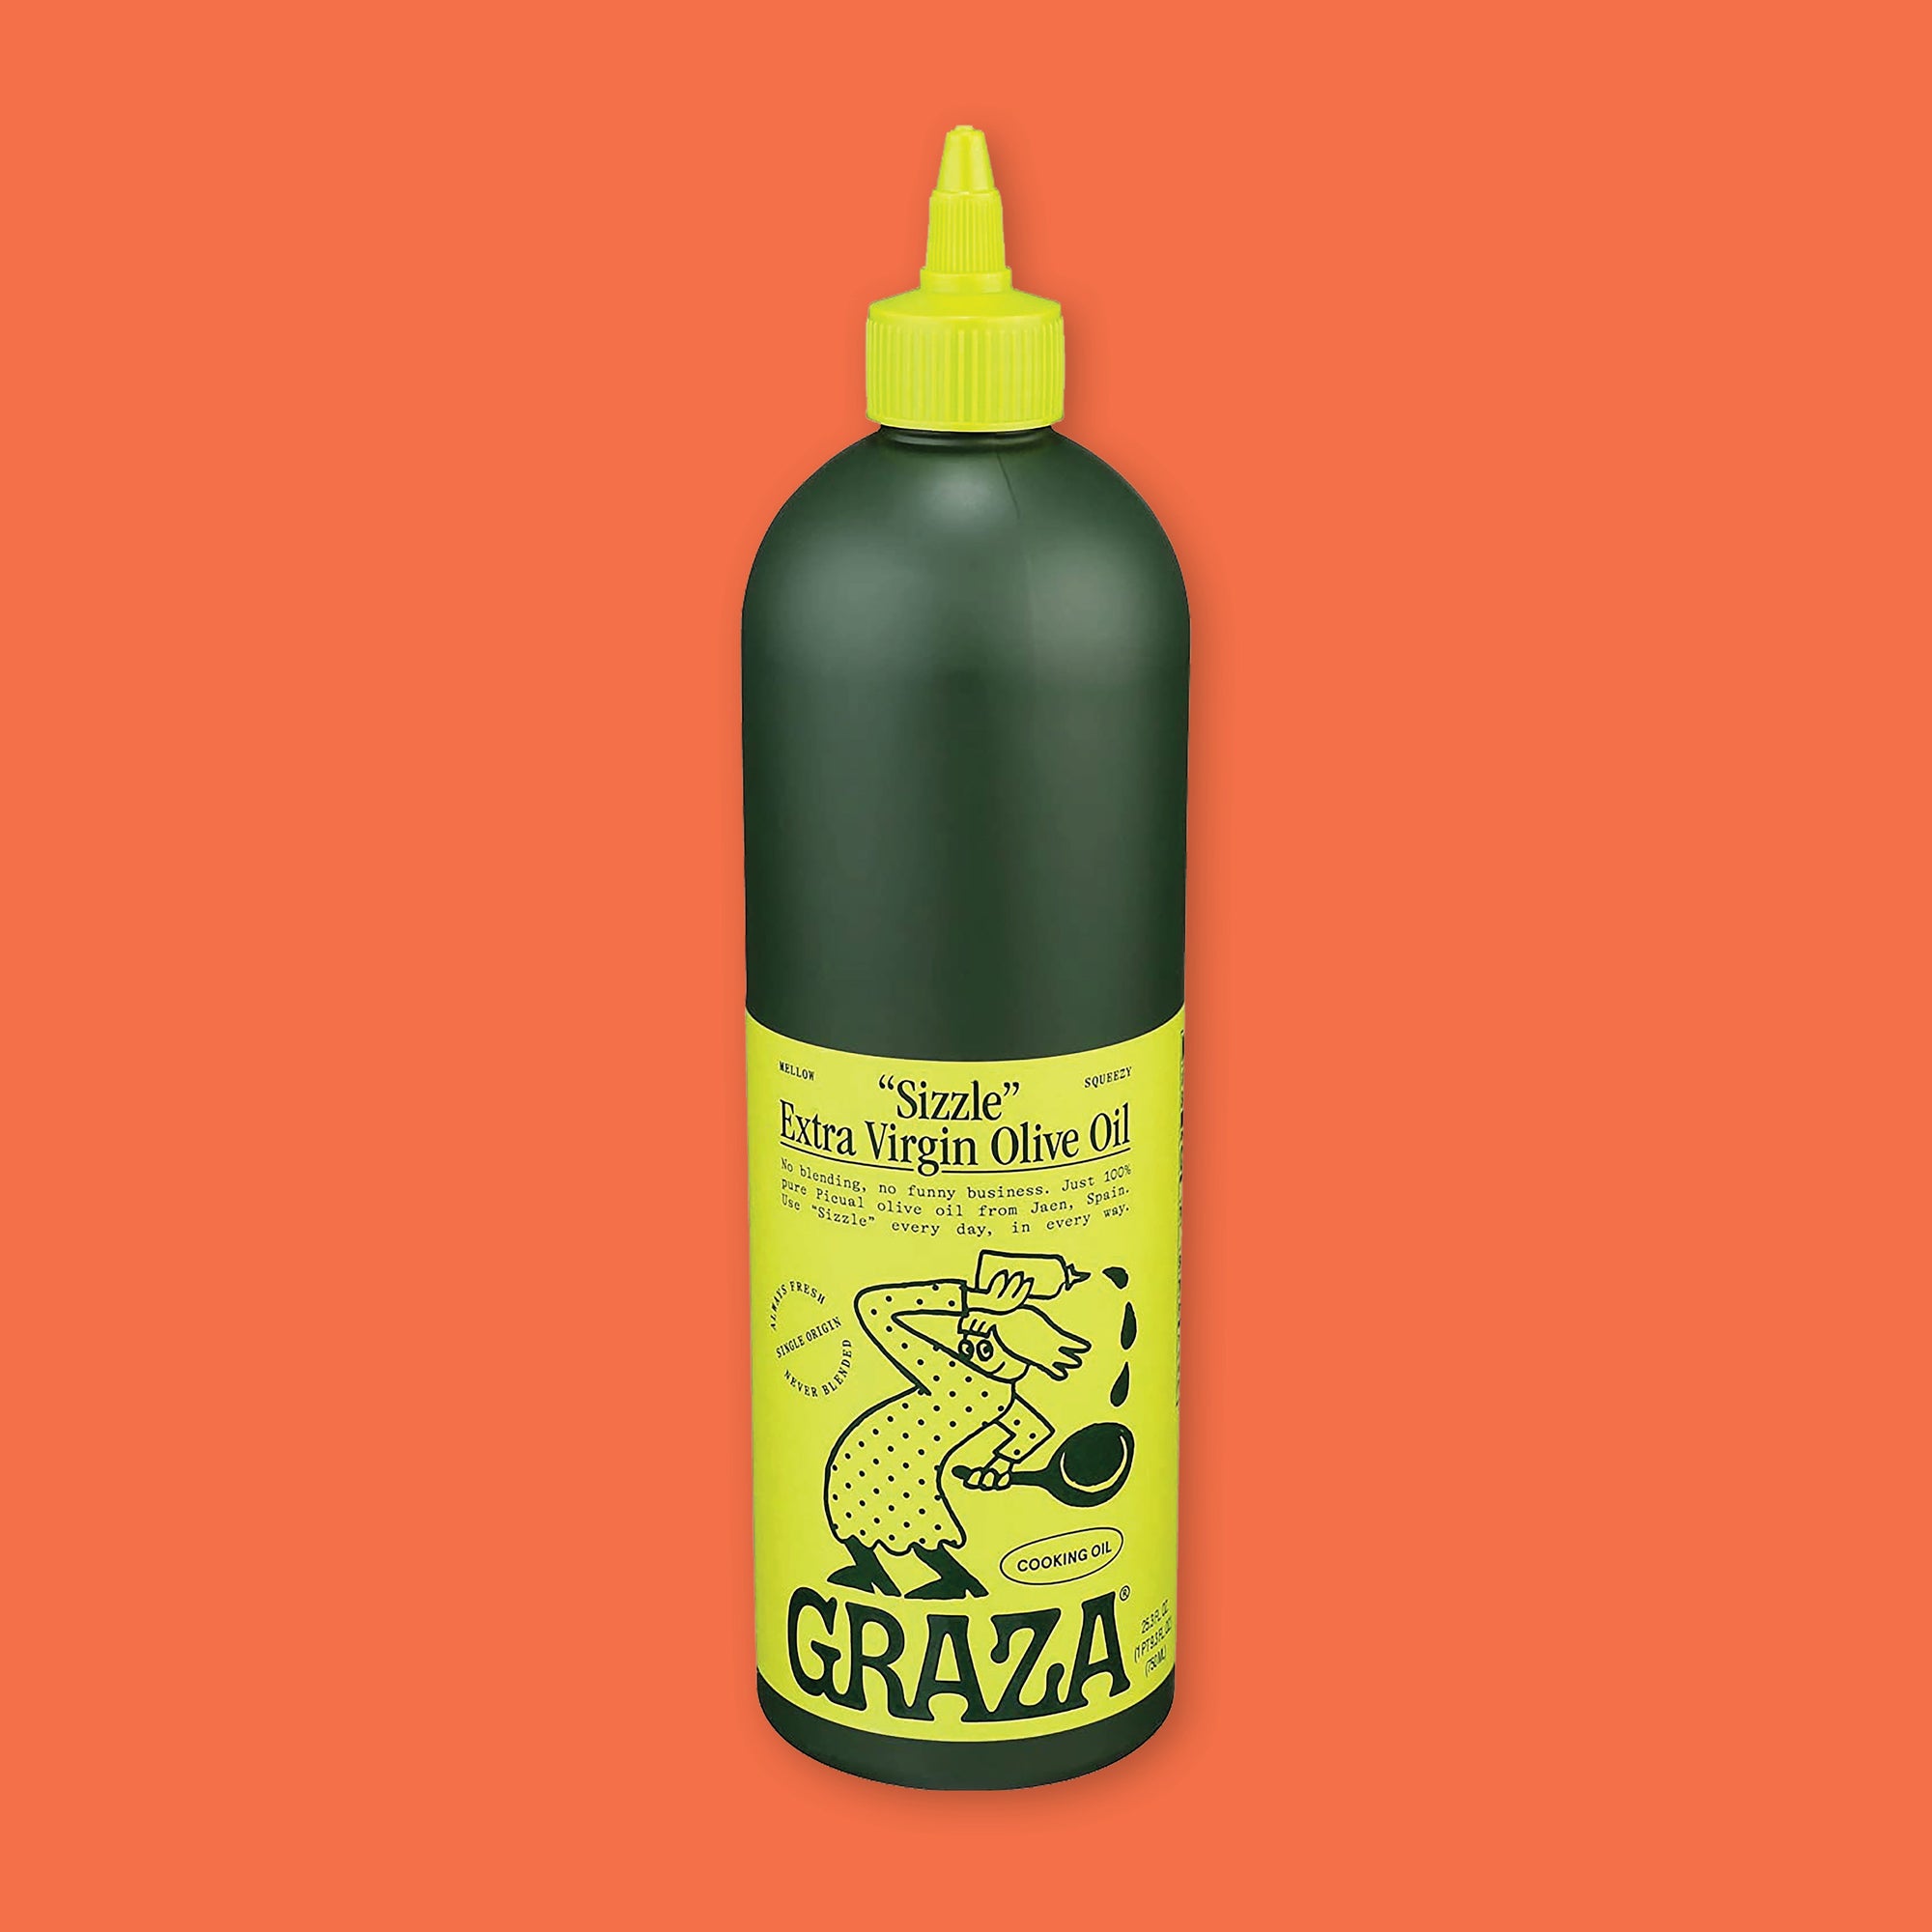 On an orangey-red background sits a bottle. This dark green bottle has a yellow cap and label. It says ""Sizzle" Extra Virgin Olive Oil" in black, serif font. It is "MELLOW" AND "SQUEEZY". It has an illustration of an olive branch with a spout on the olive in black. It says "ALWAYS FRESH NEVER BLENDED SINGLE ORIGIN" and "COOKING OIL" and "GRAZA" at the bottom in black, handwritten lettering. 25.3 fl oz (750 ml)